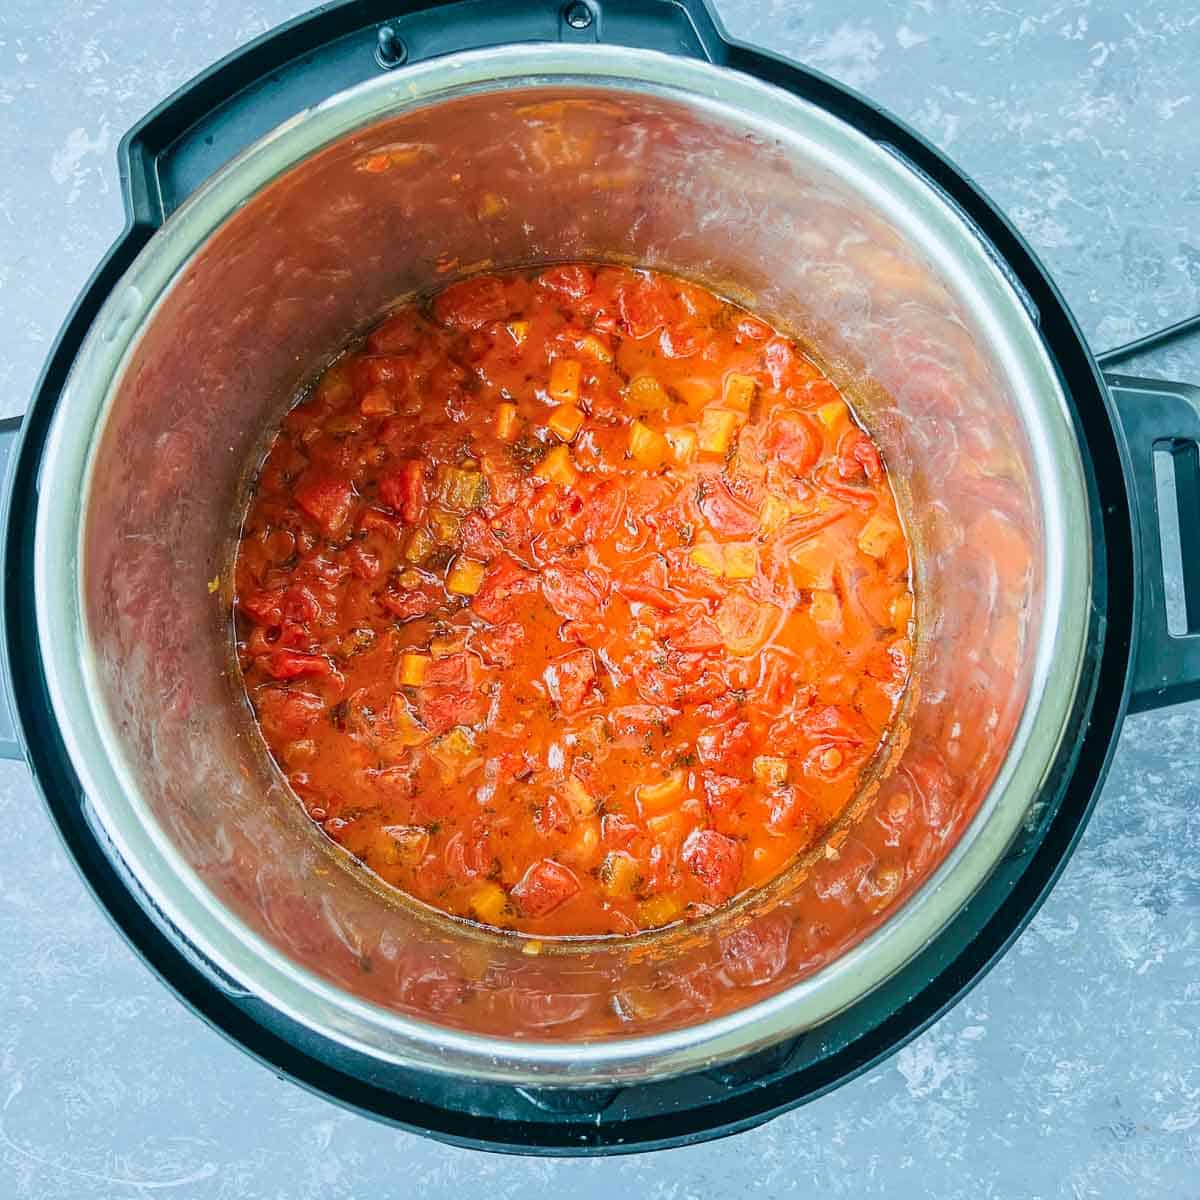 Pressure cooked soup in the Instant Pot.